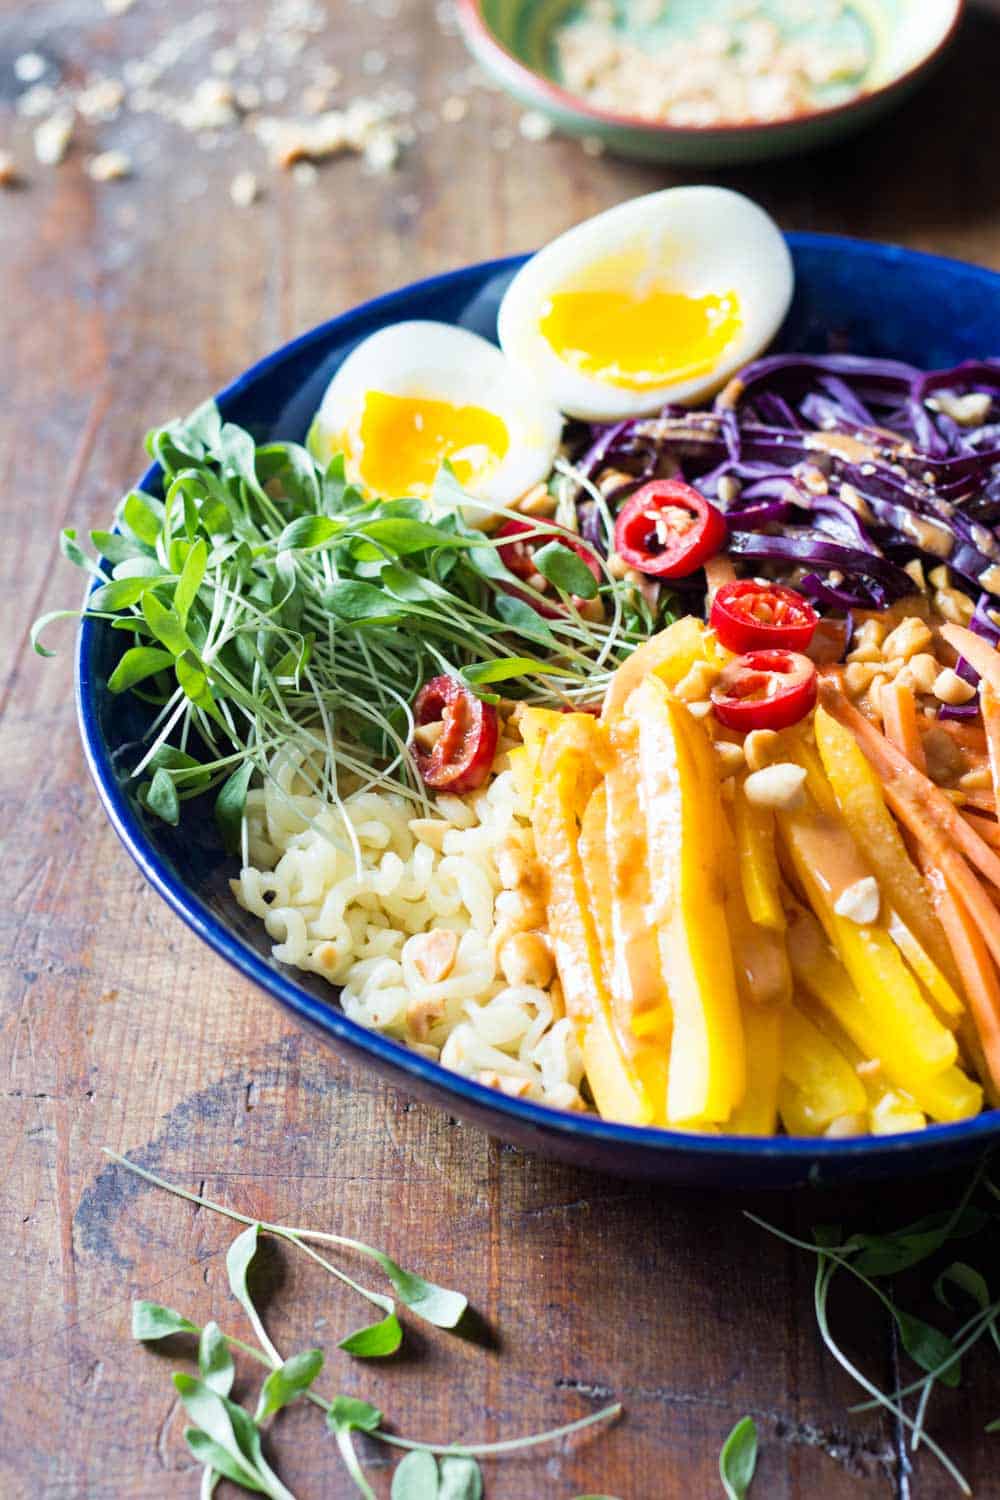 Ramen noodle salad with veggies and soft-boiled egg topped with peanut sauce, presented in a blue plate